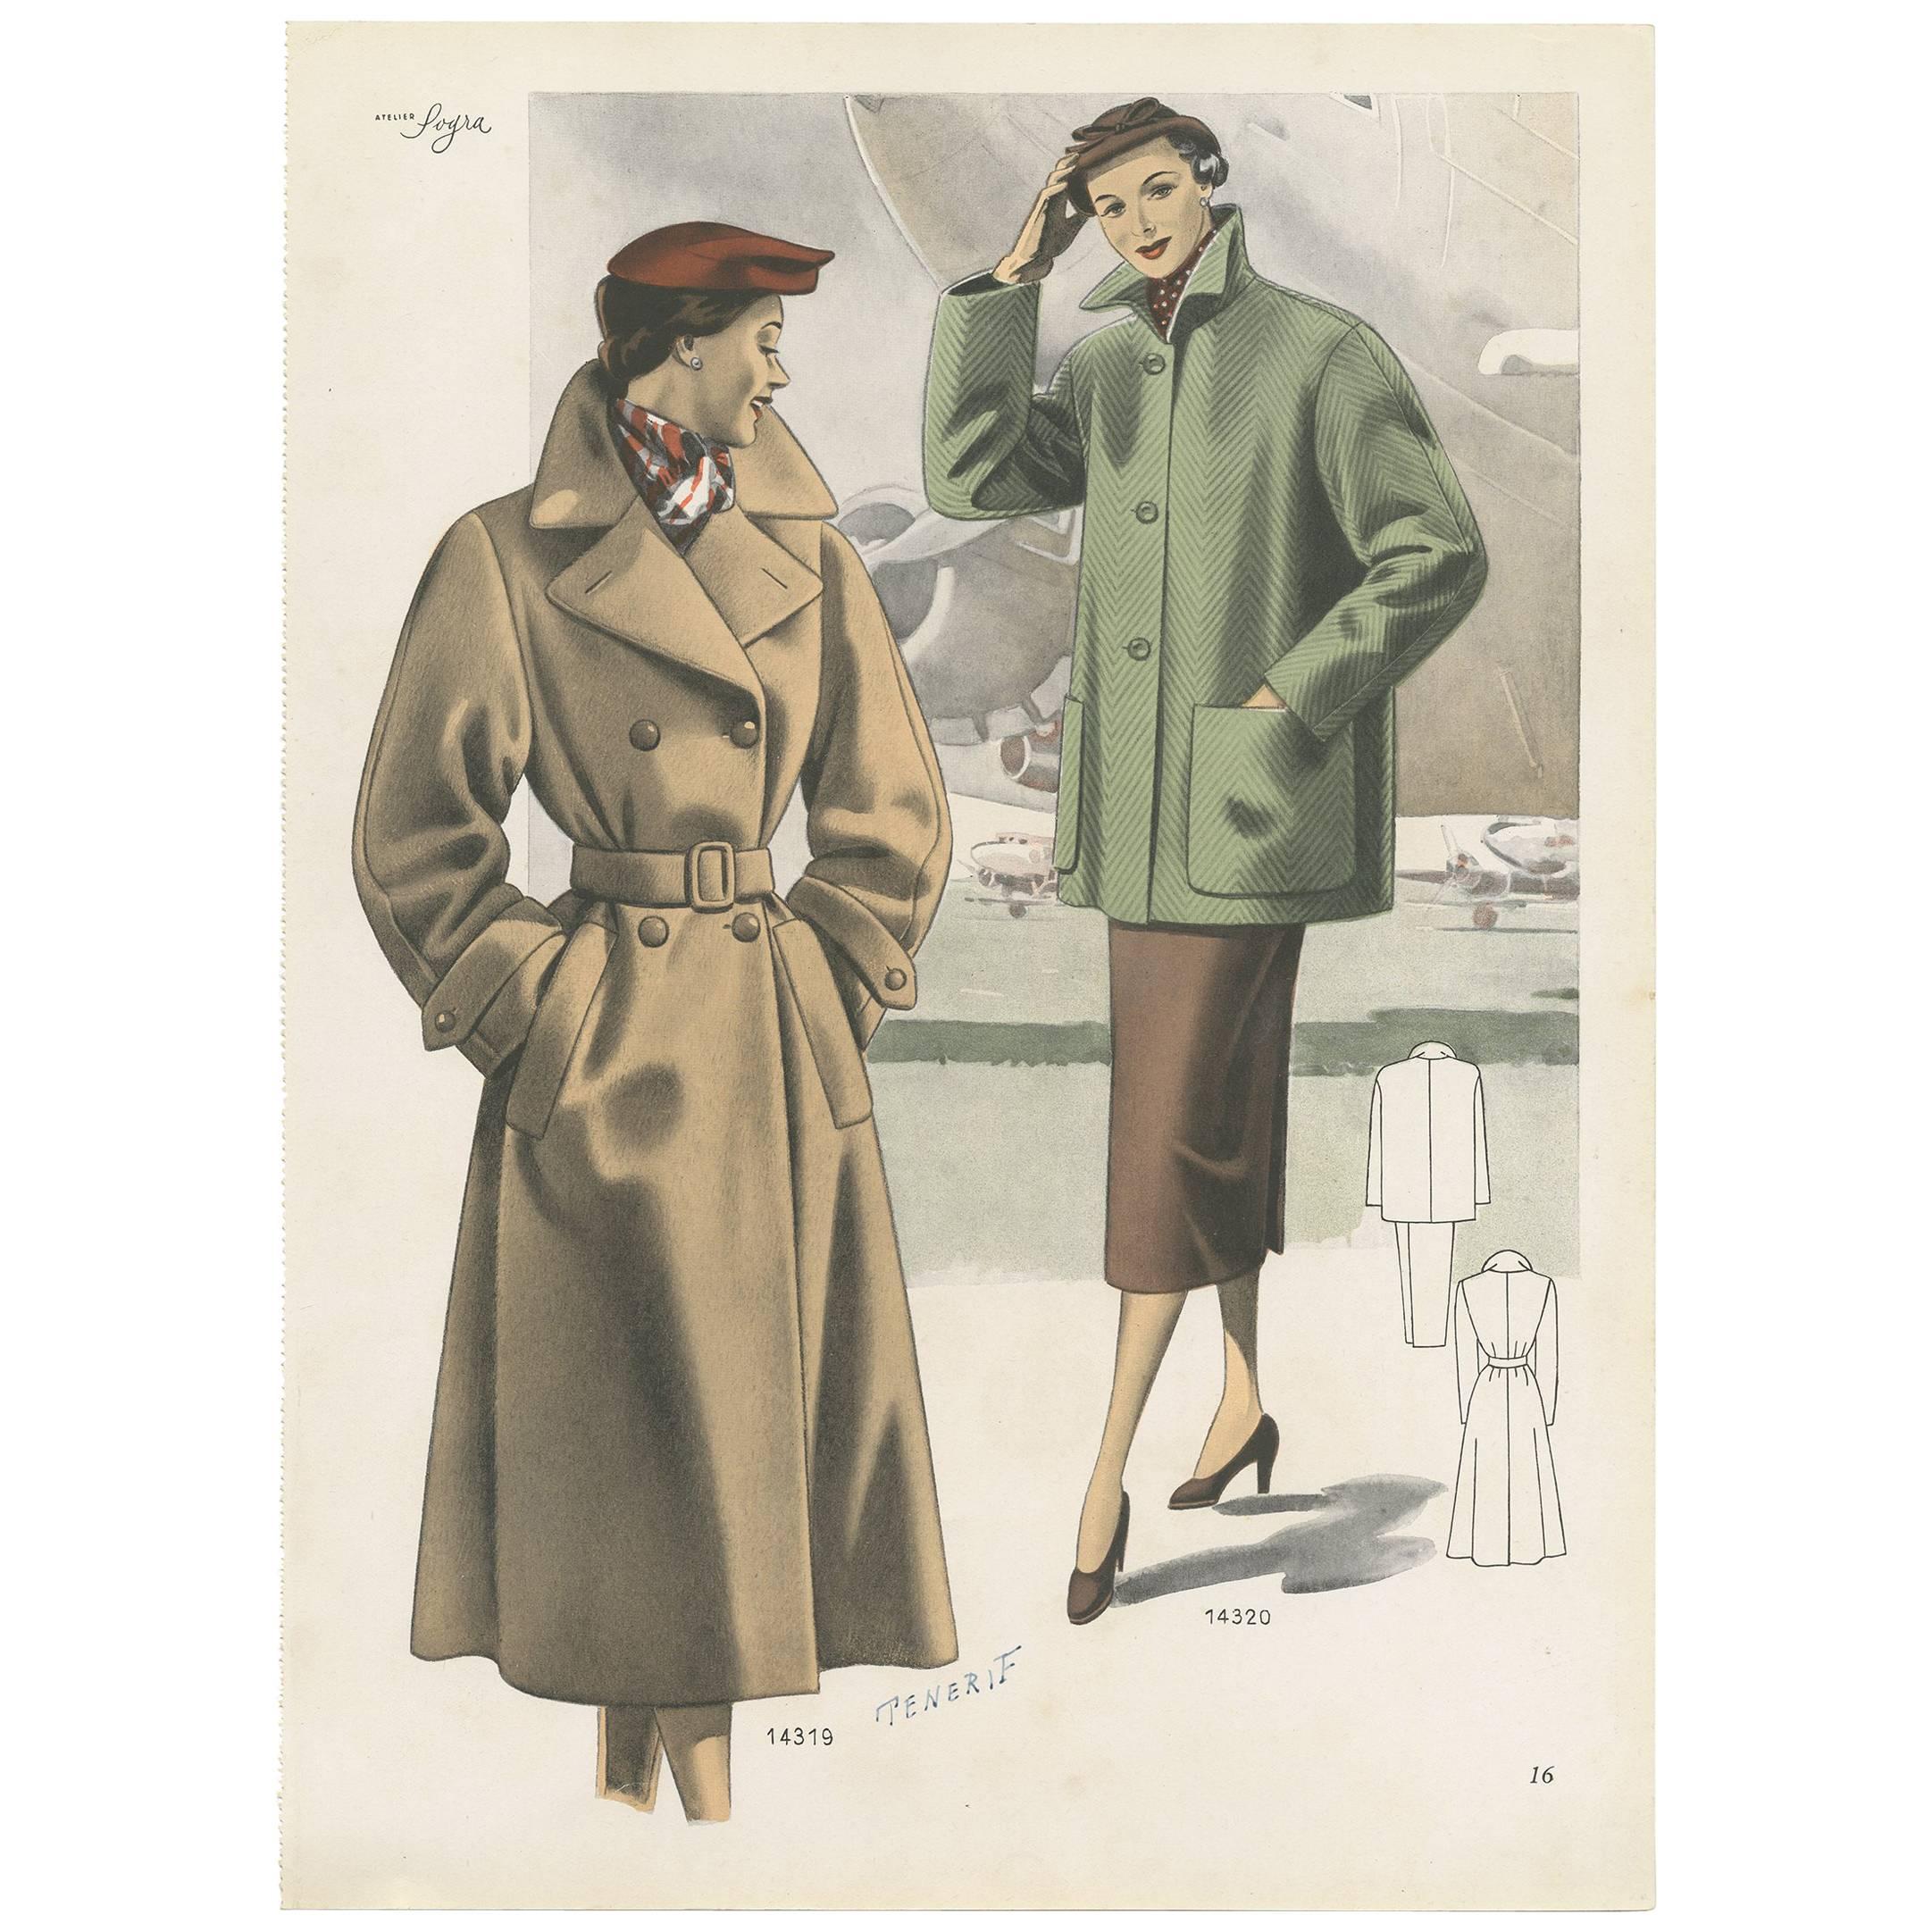 Vintage Fashion Print 'Pl.14319' Published in Ladies Styles, 1952 For Sale